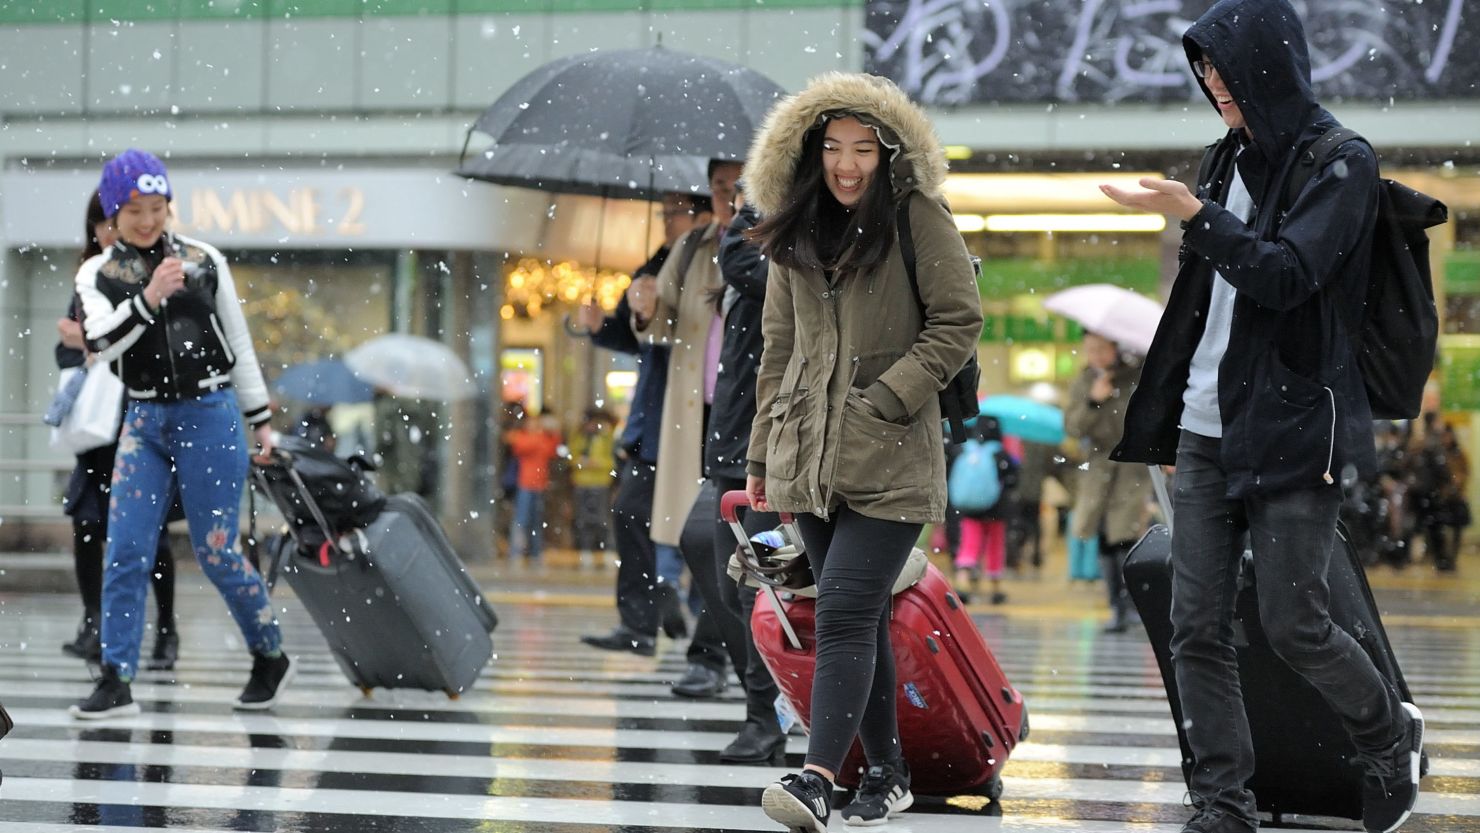 The unseasonal snow in Tokyo caught city dwellers by surprise.